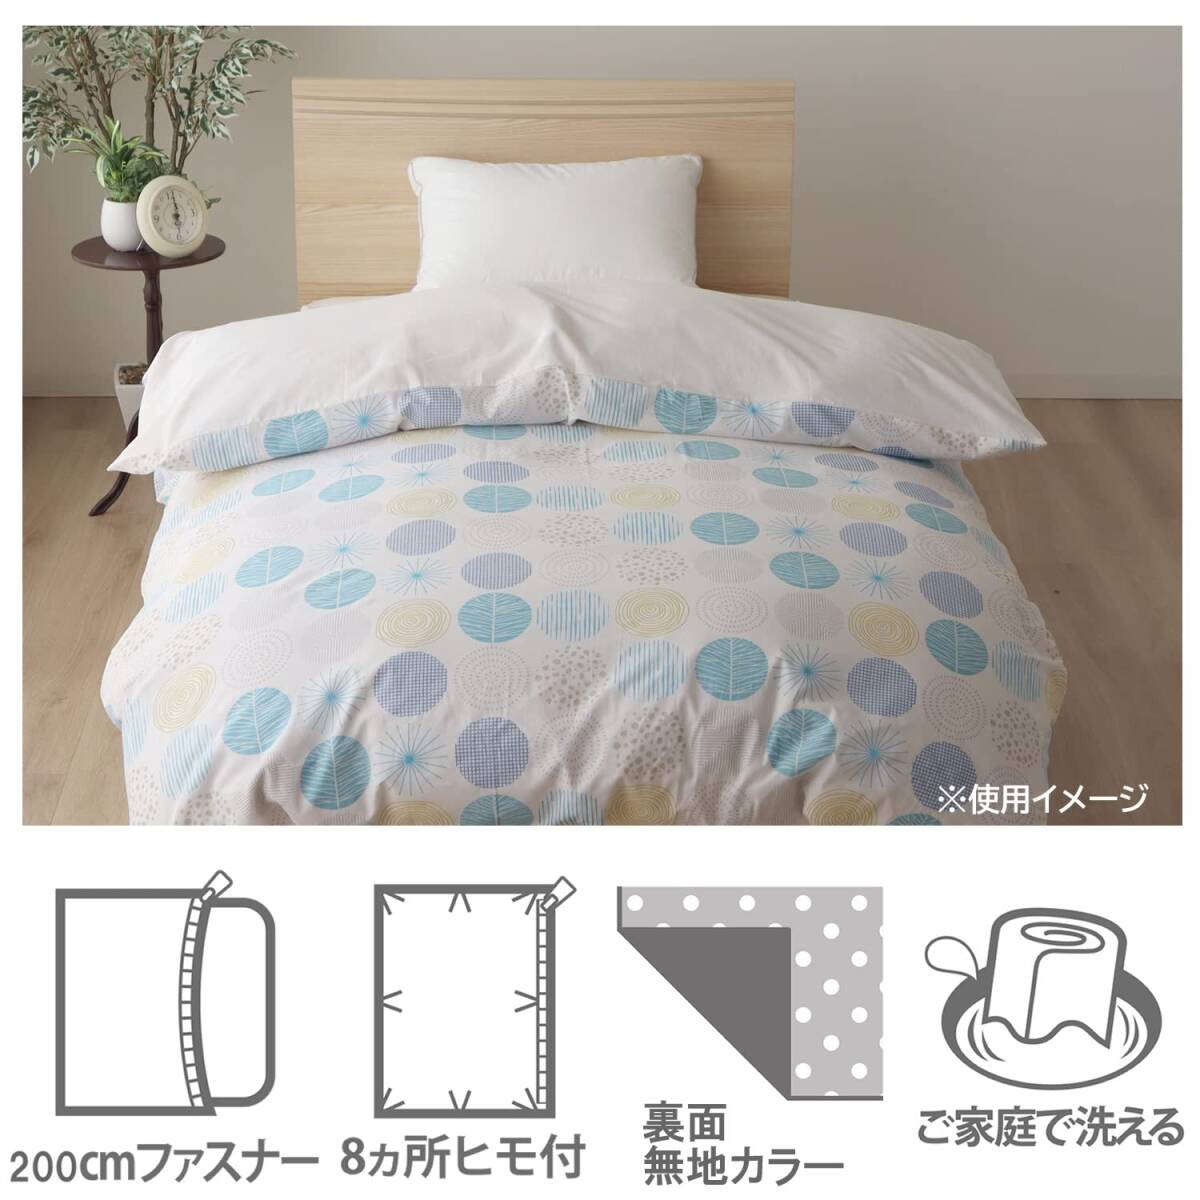 me Lee Night .. futon cover [ natural dot ] blue single approximately 150×200cm cotton 100%... ventilation feeling good feel of all si